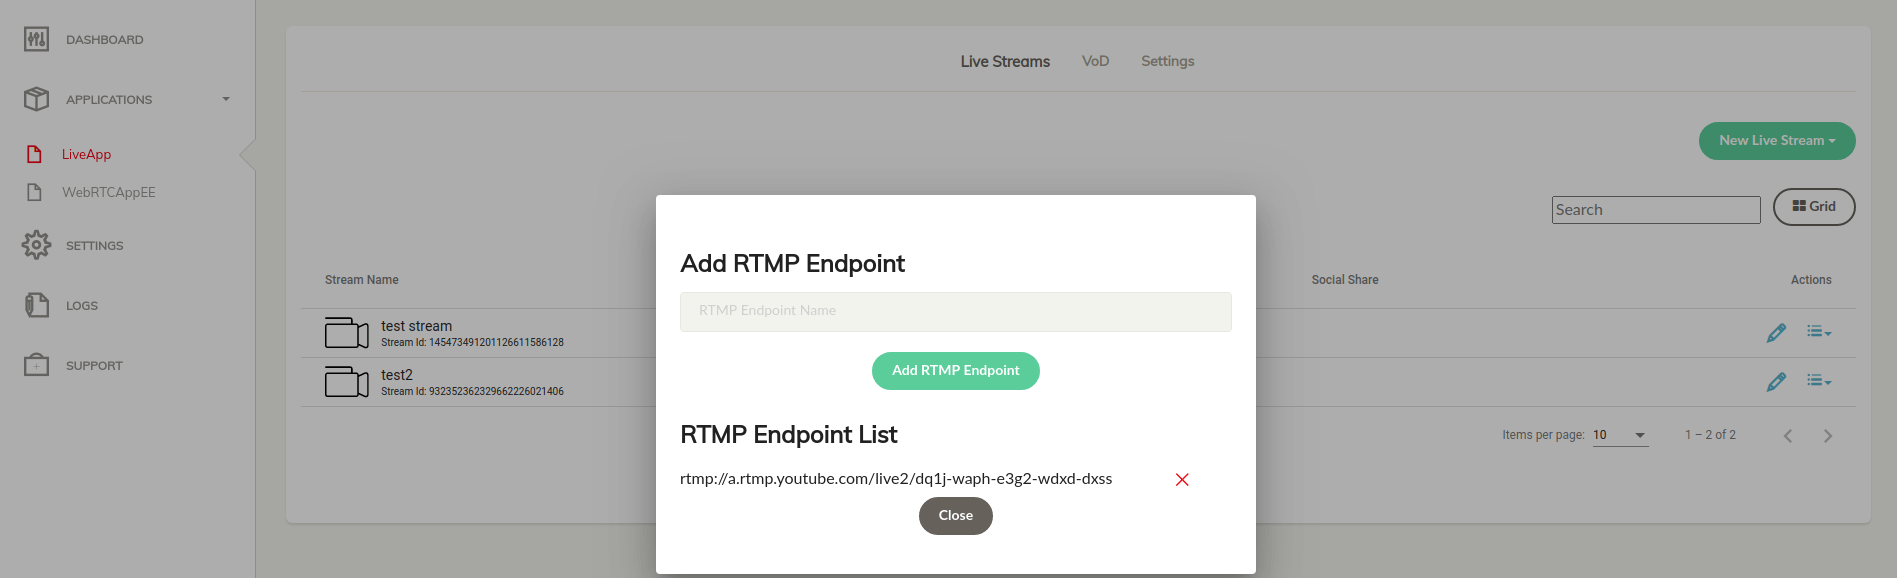 ant-media-dashboard-add-youtube-rtmp-endpoint